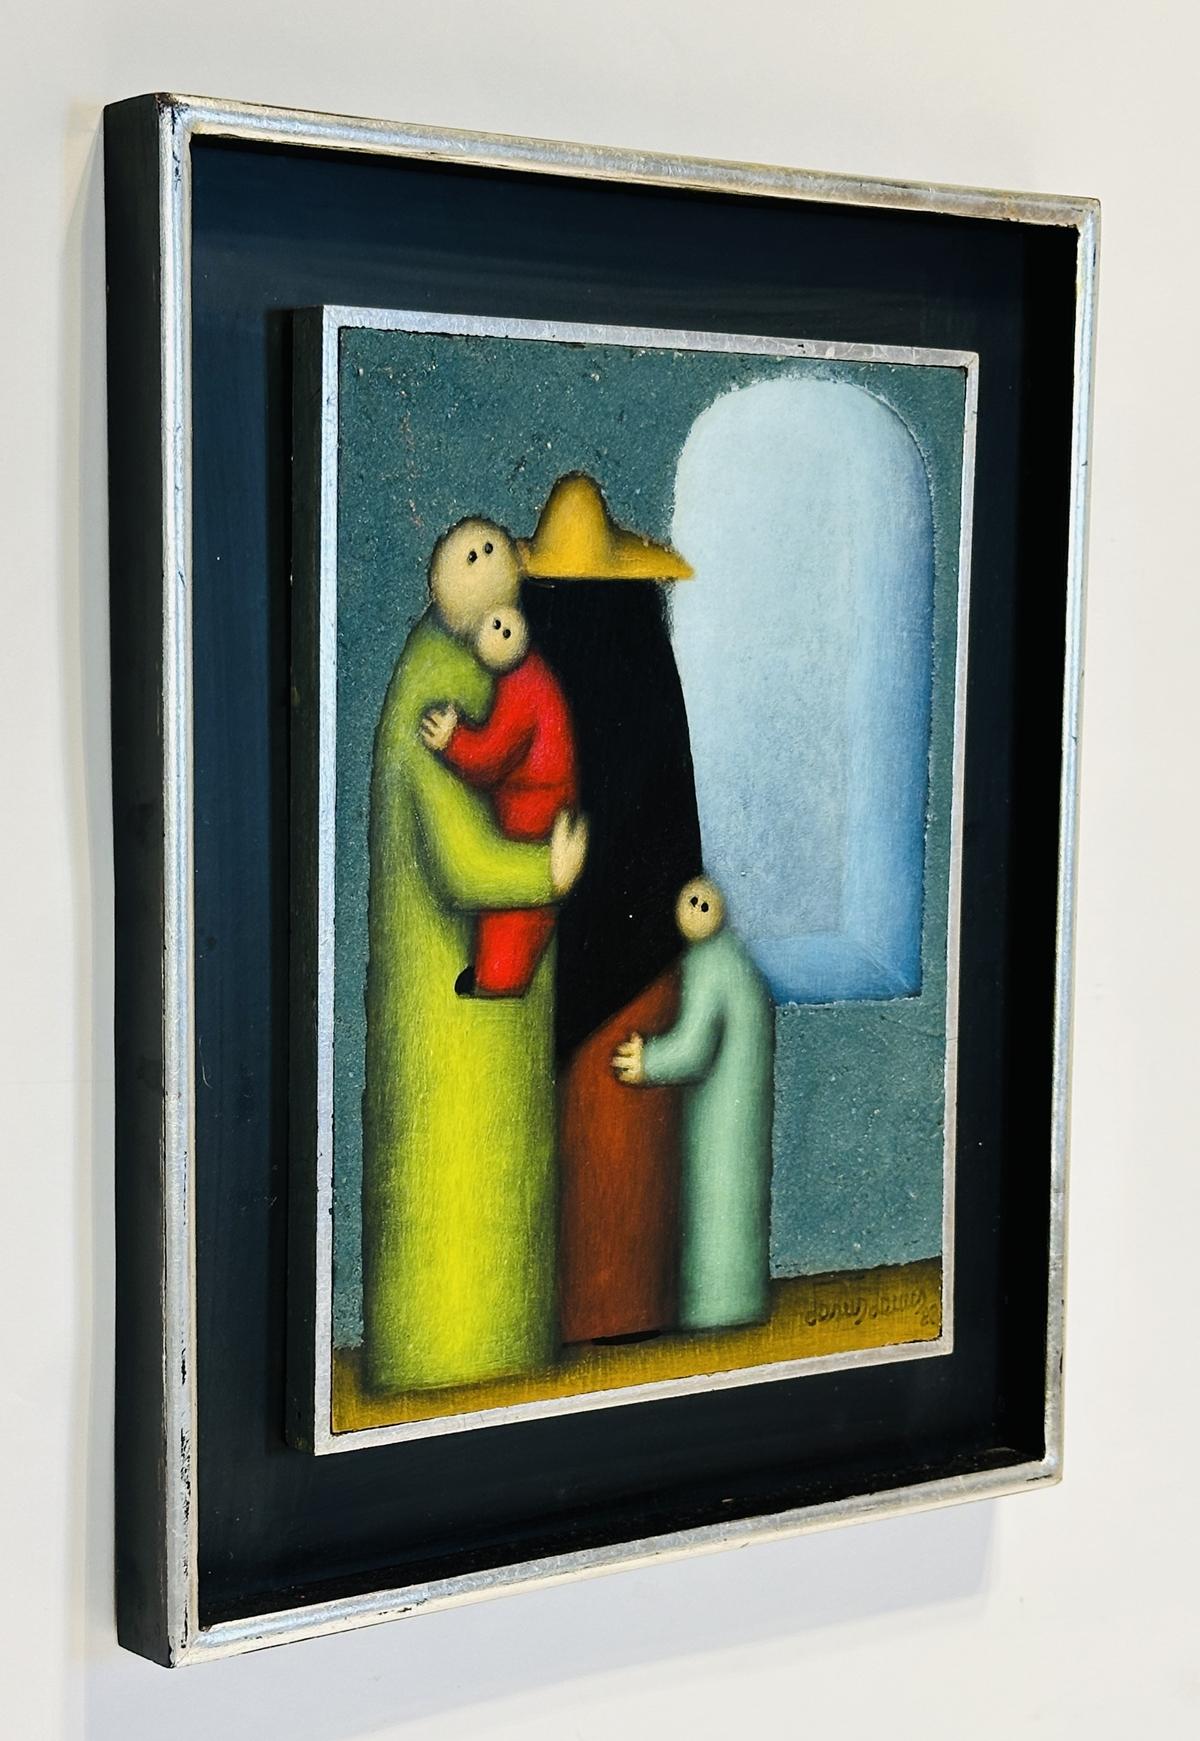 Introducing a true masterpiece from renowned Mexican artist Jesus Leuus, this exquisite painting captures the essence of Mexican culture with its vibrant colors and exceptional attention to detail. 

Painted in 1983, this remarkable artwork